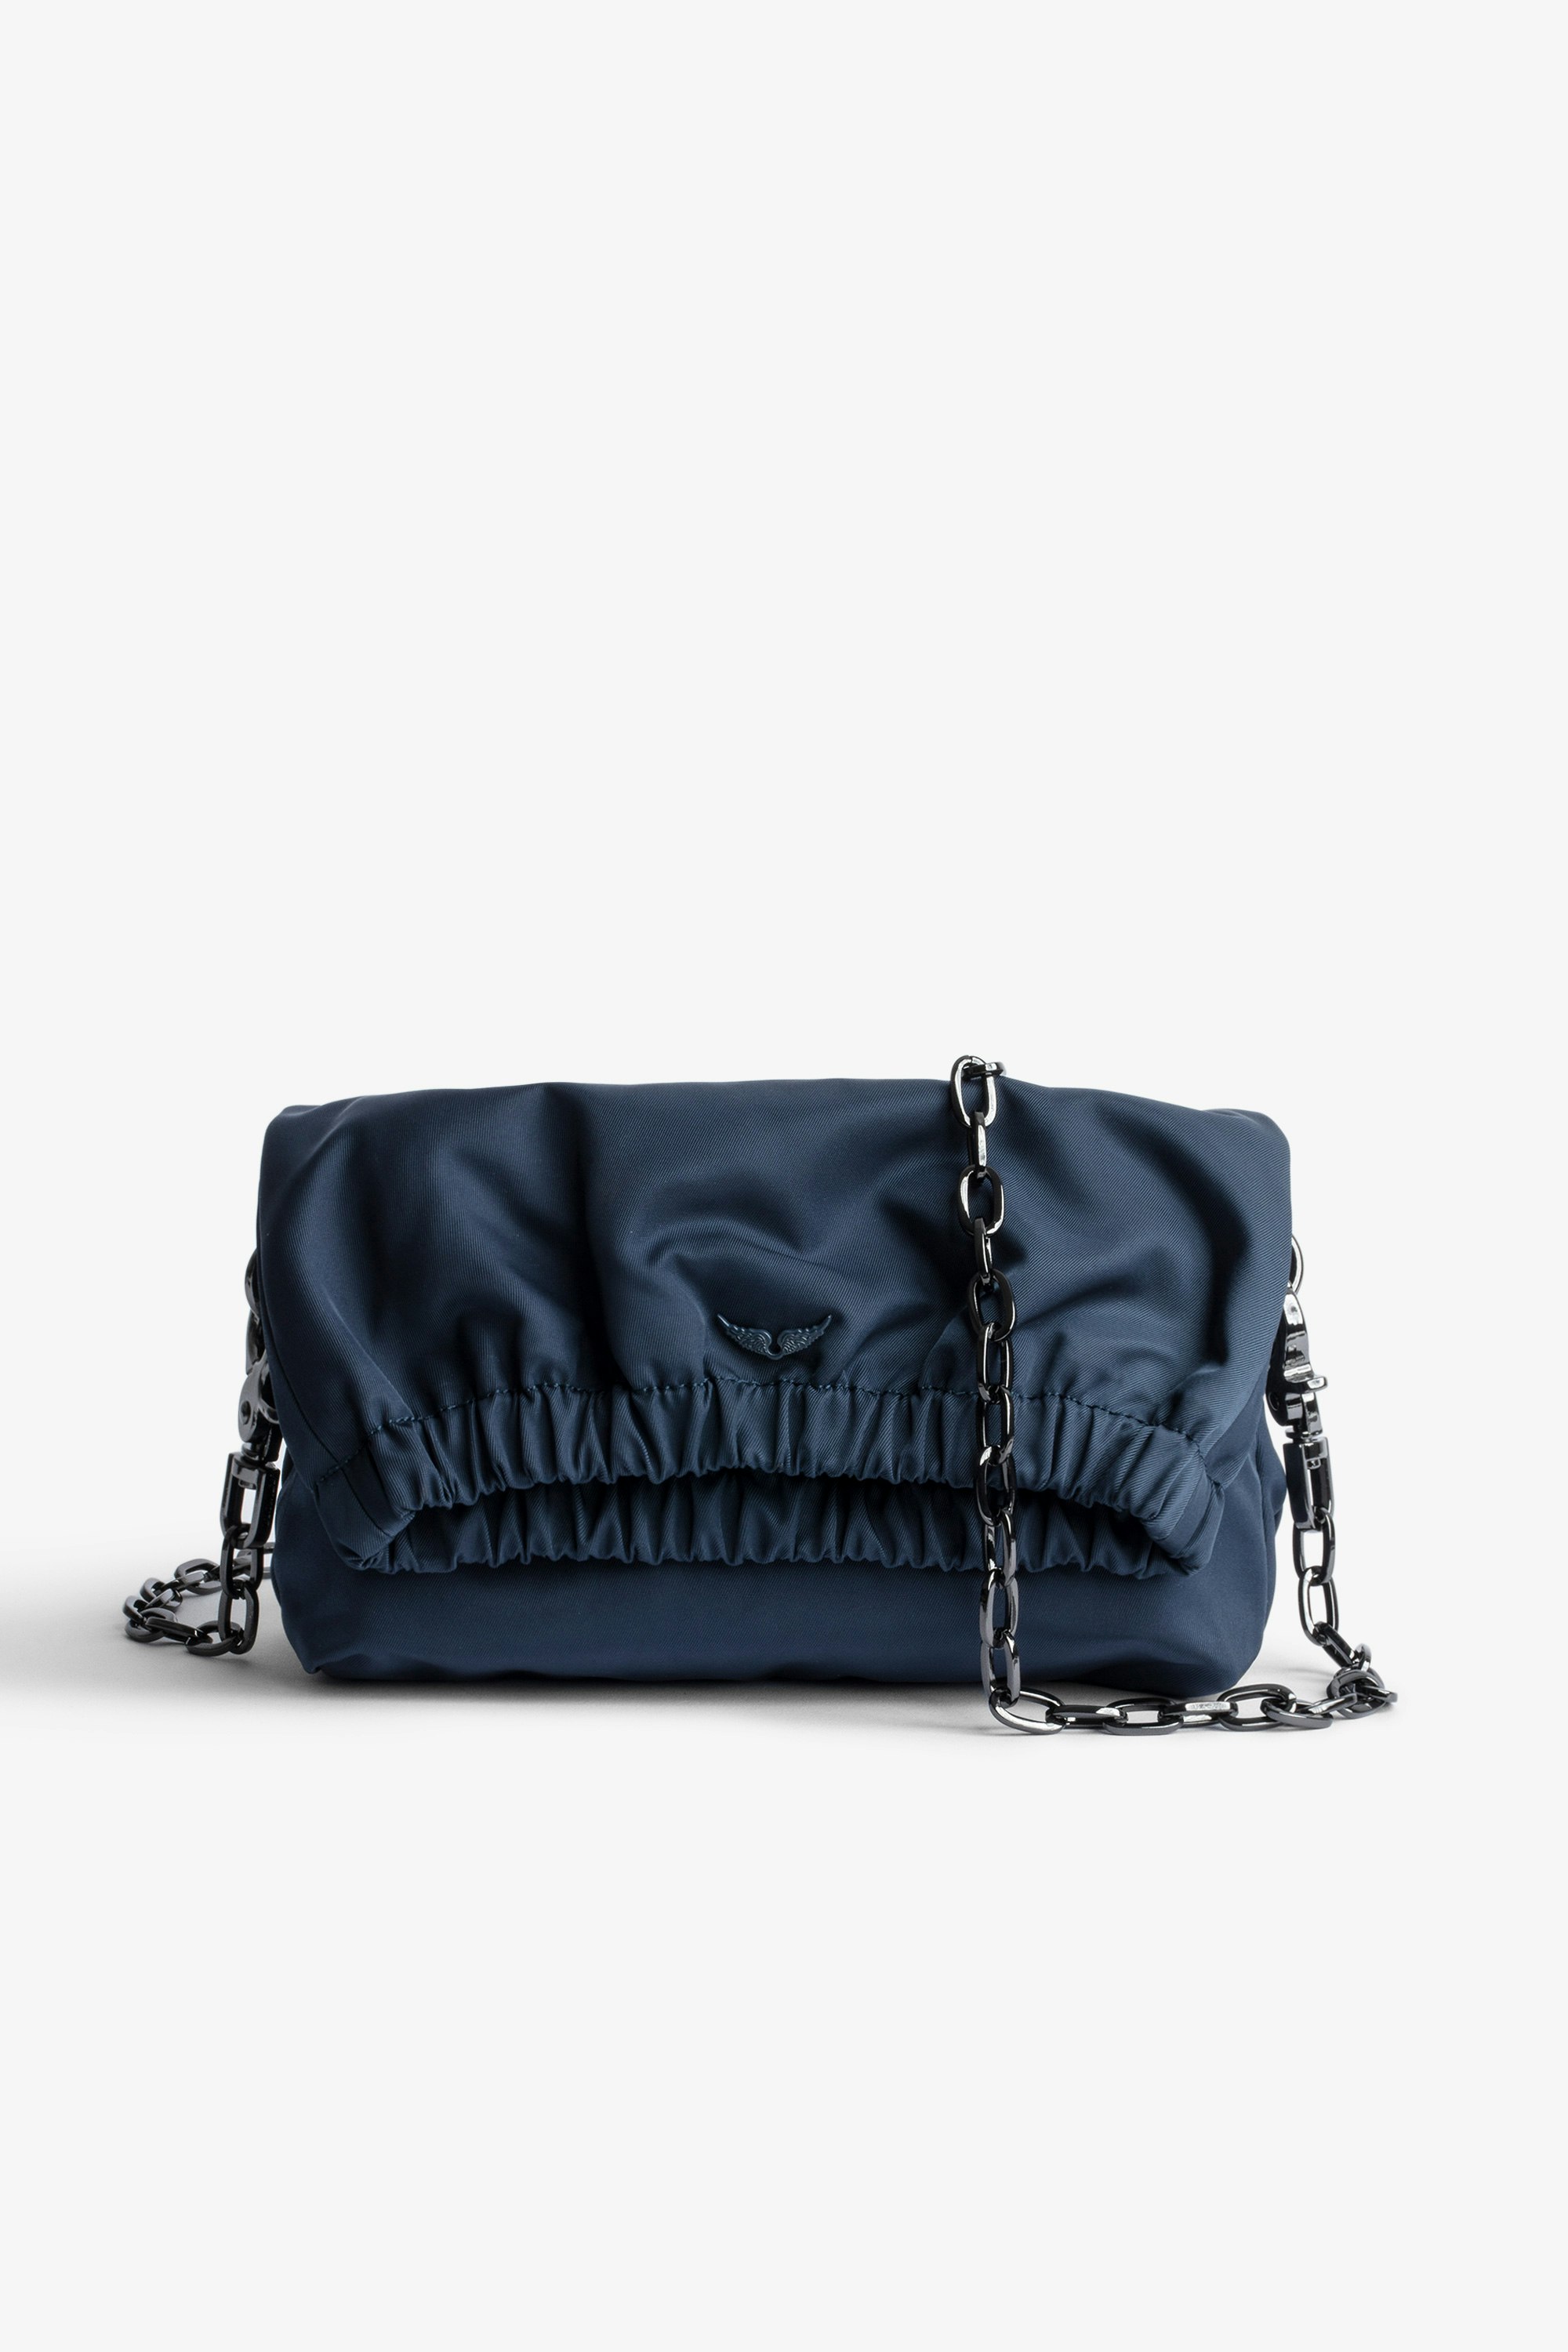 Rockyssime XS バッグ Women’s small clutch bag in blue nylon with metal chain